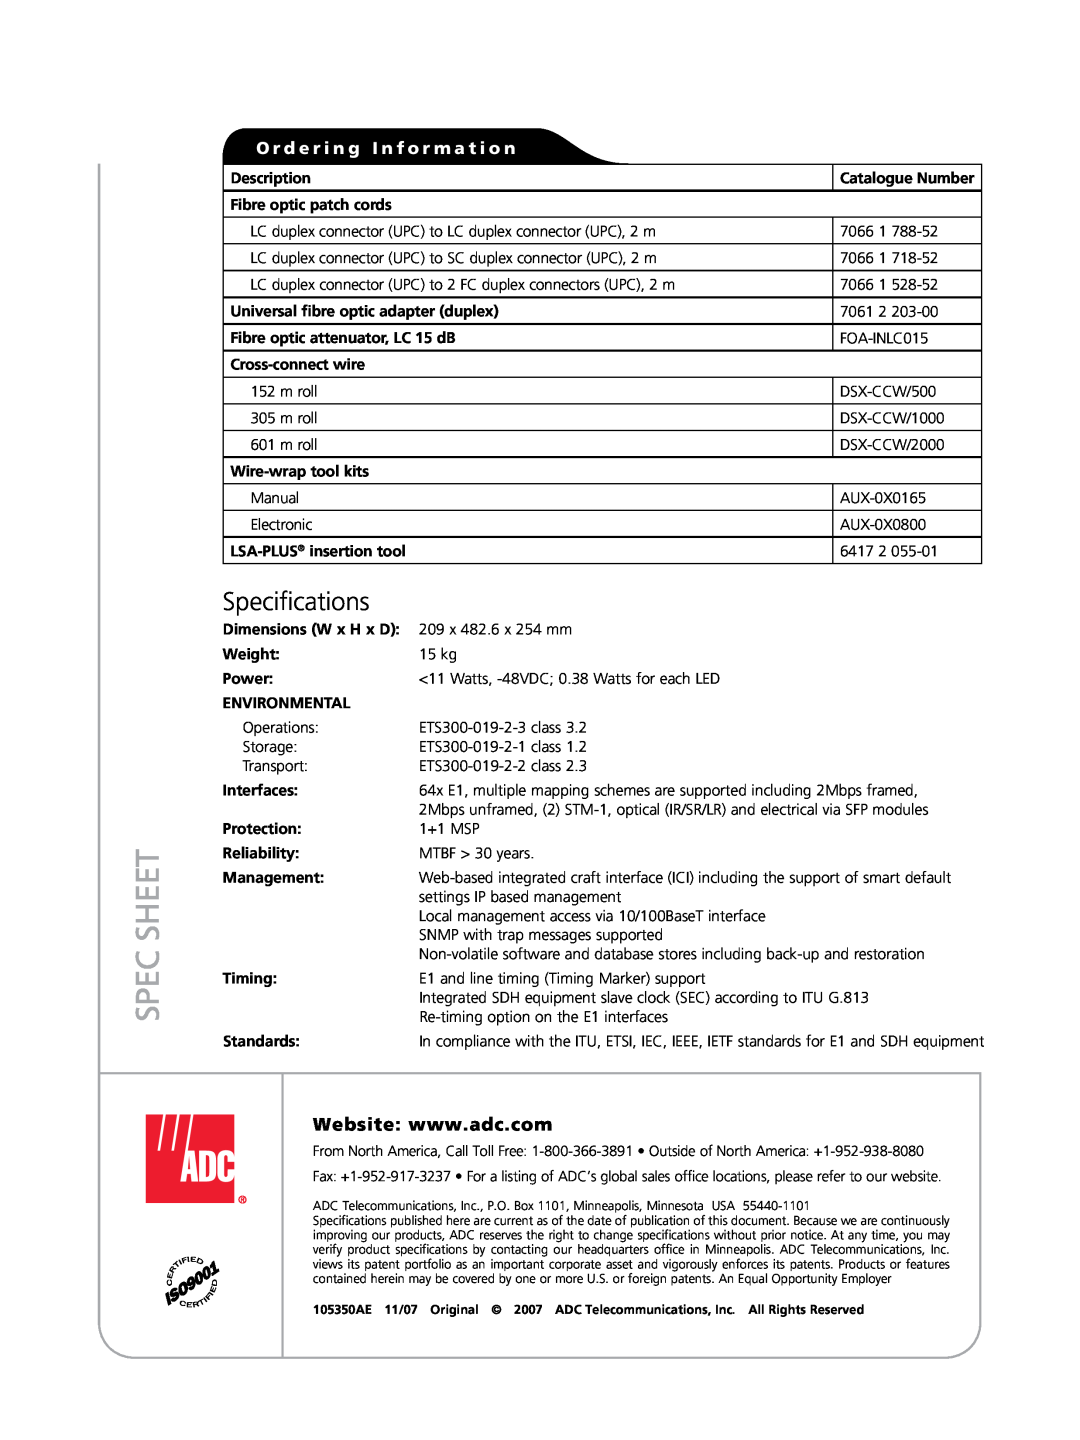 ADC ASX Spec Sheet, Specifications, O r d e r i n g I n f o r m a t i o n, Description, Catalogue Number, Weight, Power 